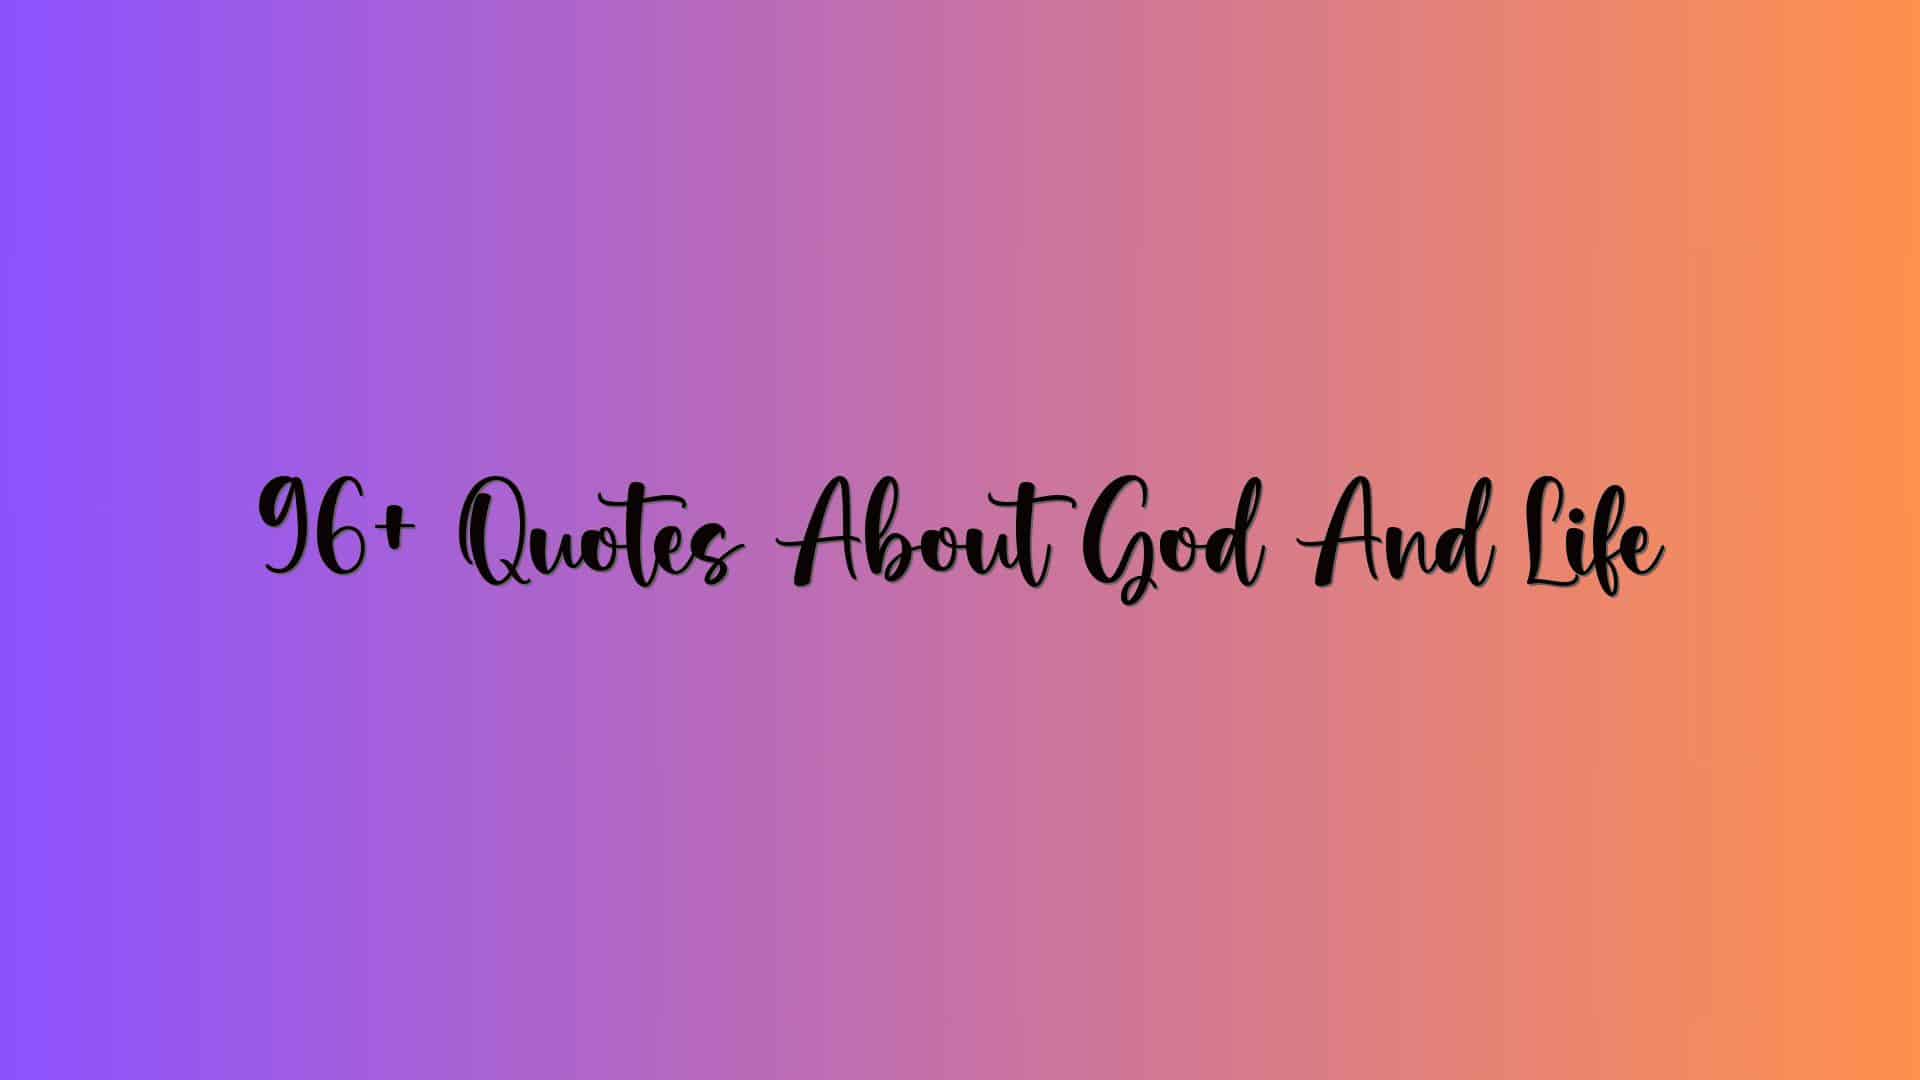 96+ Quotes About God And Life